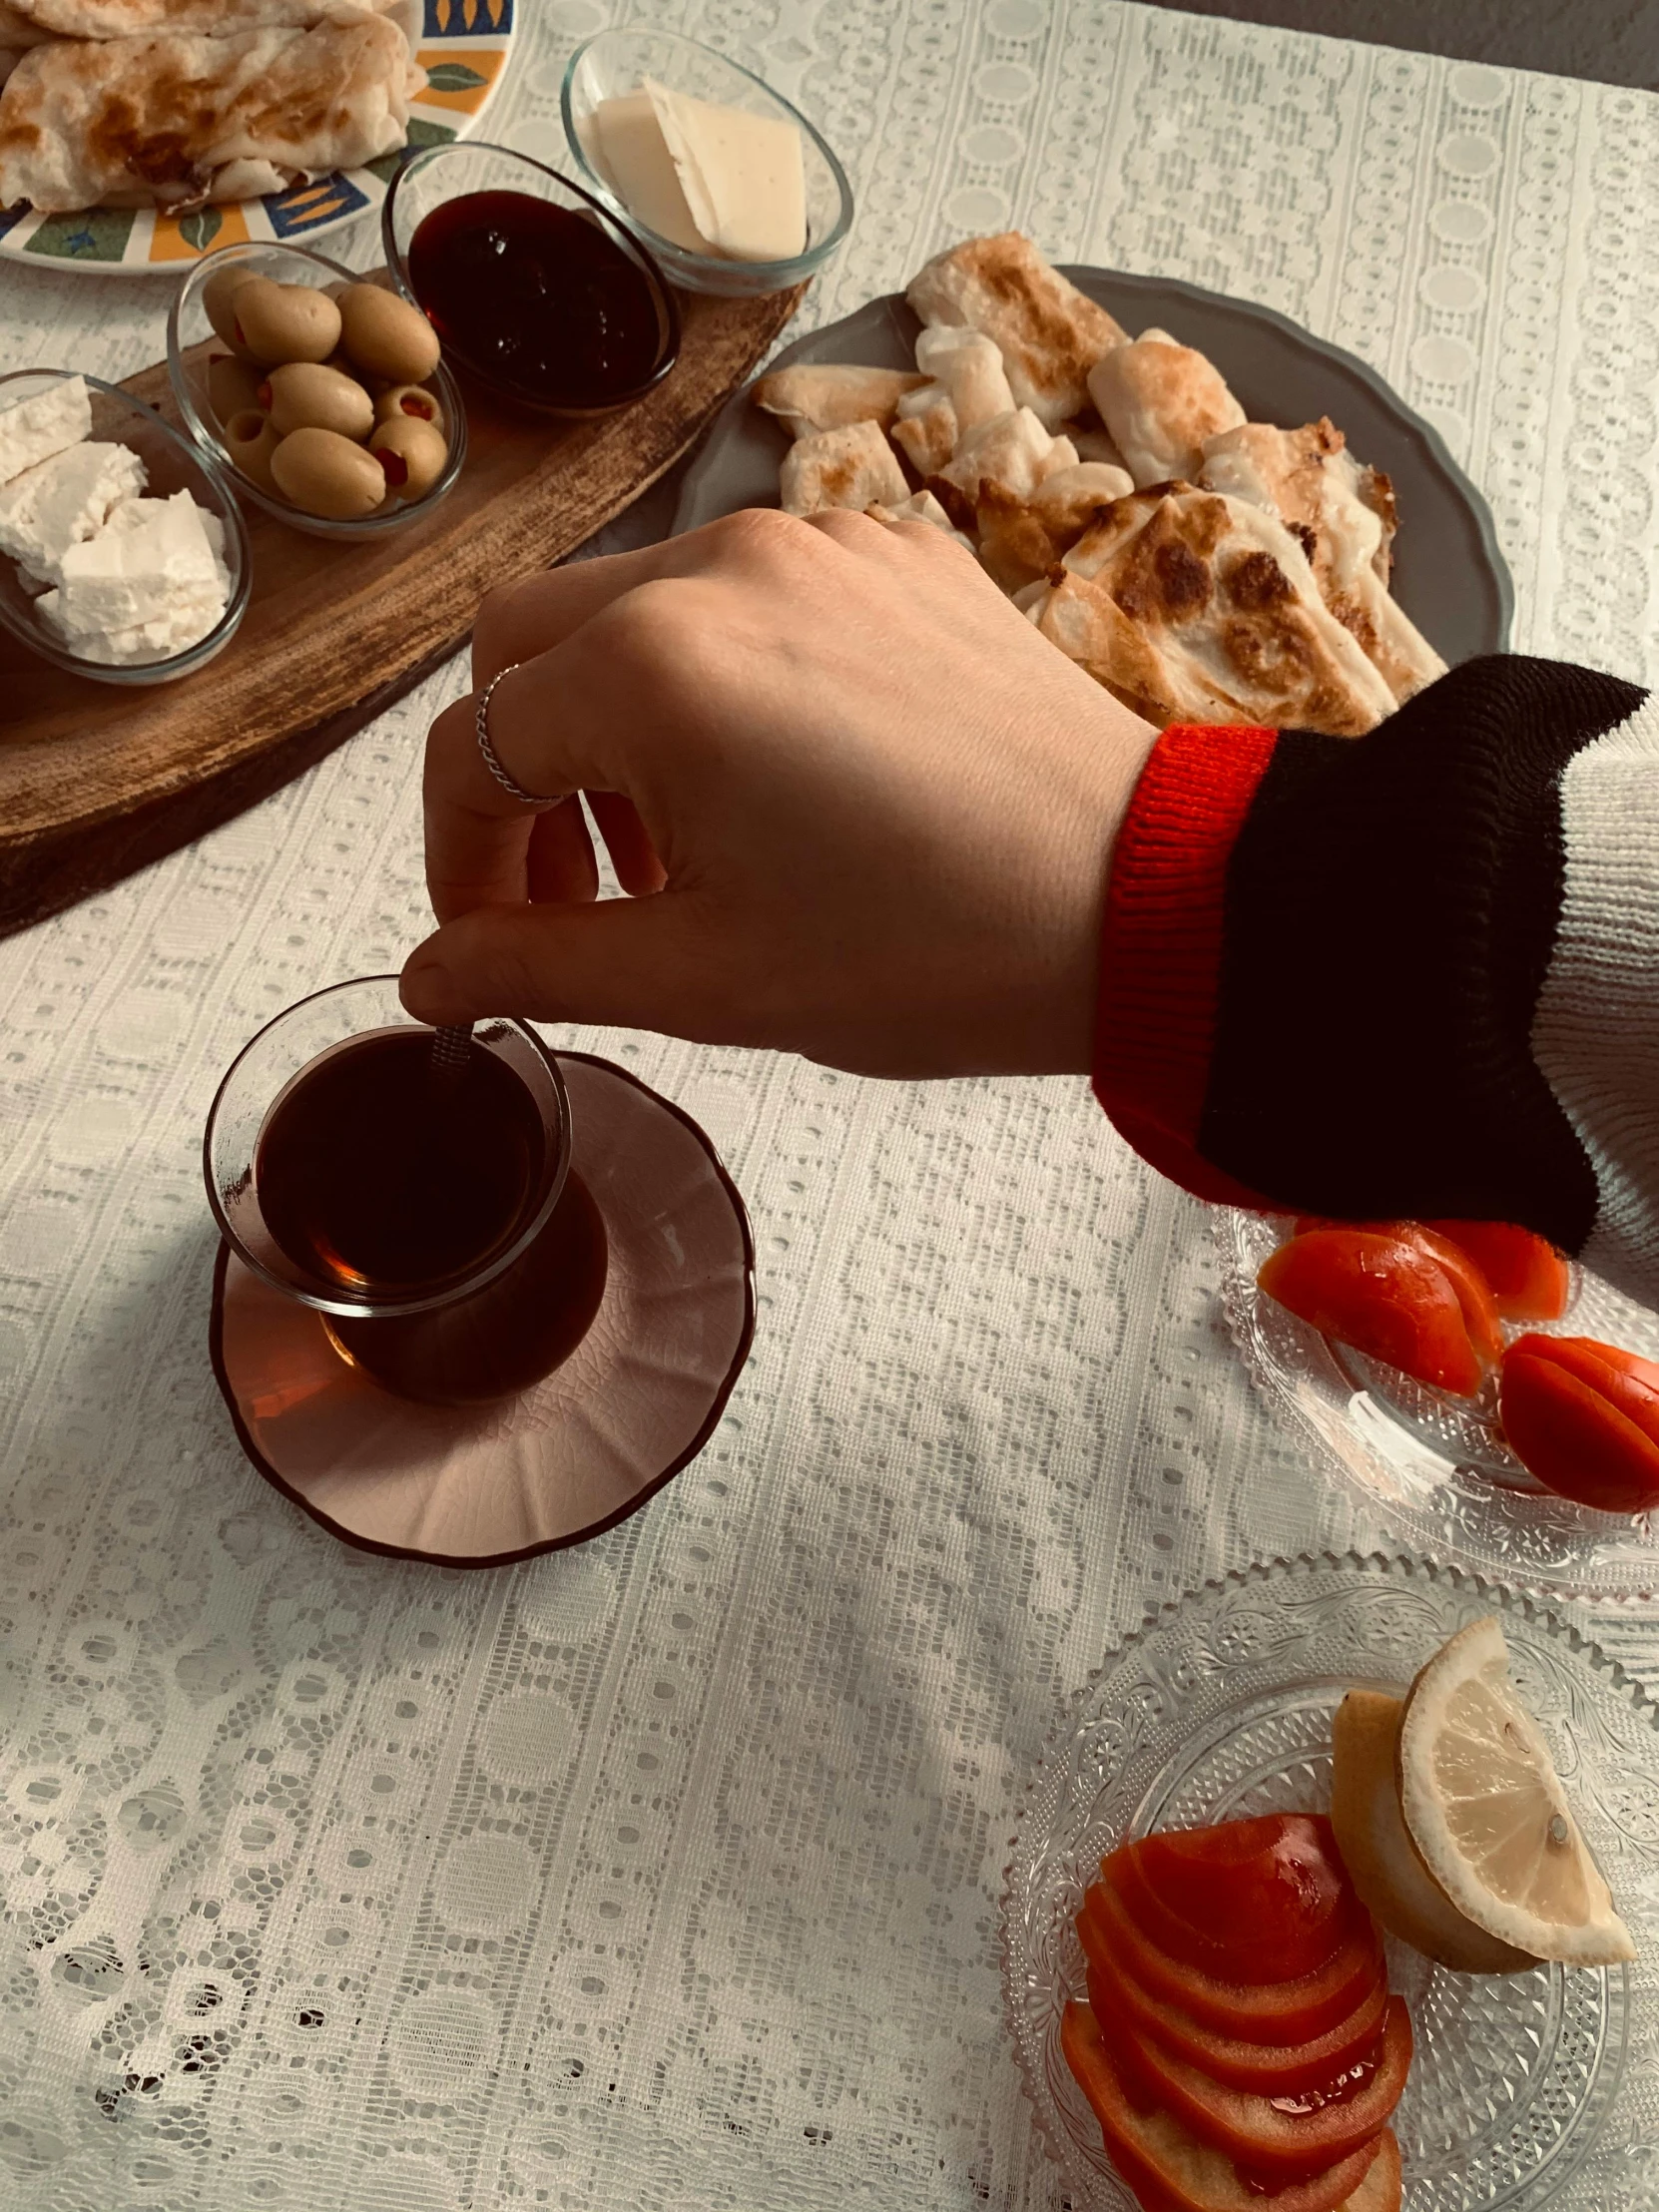 a table topped with plates of food and glasses of wine, a colorized photo, inspired by Louis Stettner, leather cuffs around wrists, aykut aydogdu, cropped wide sleeve, red sweatband